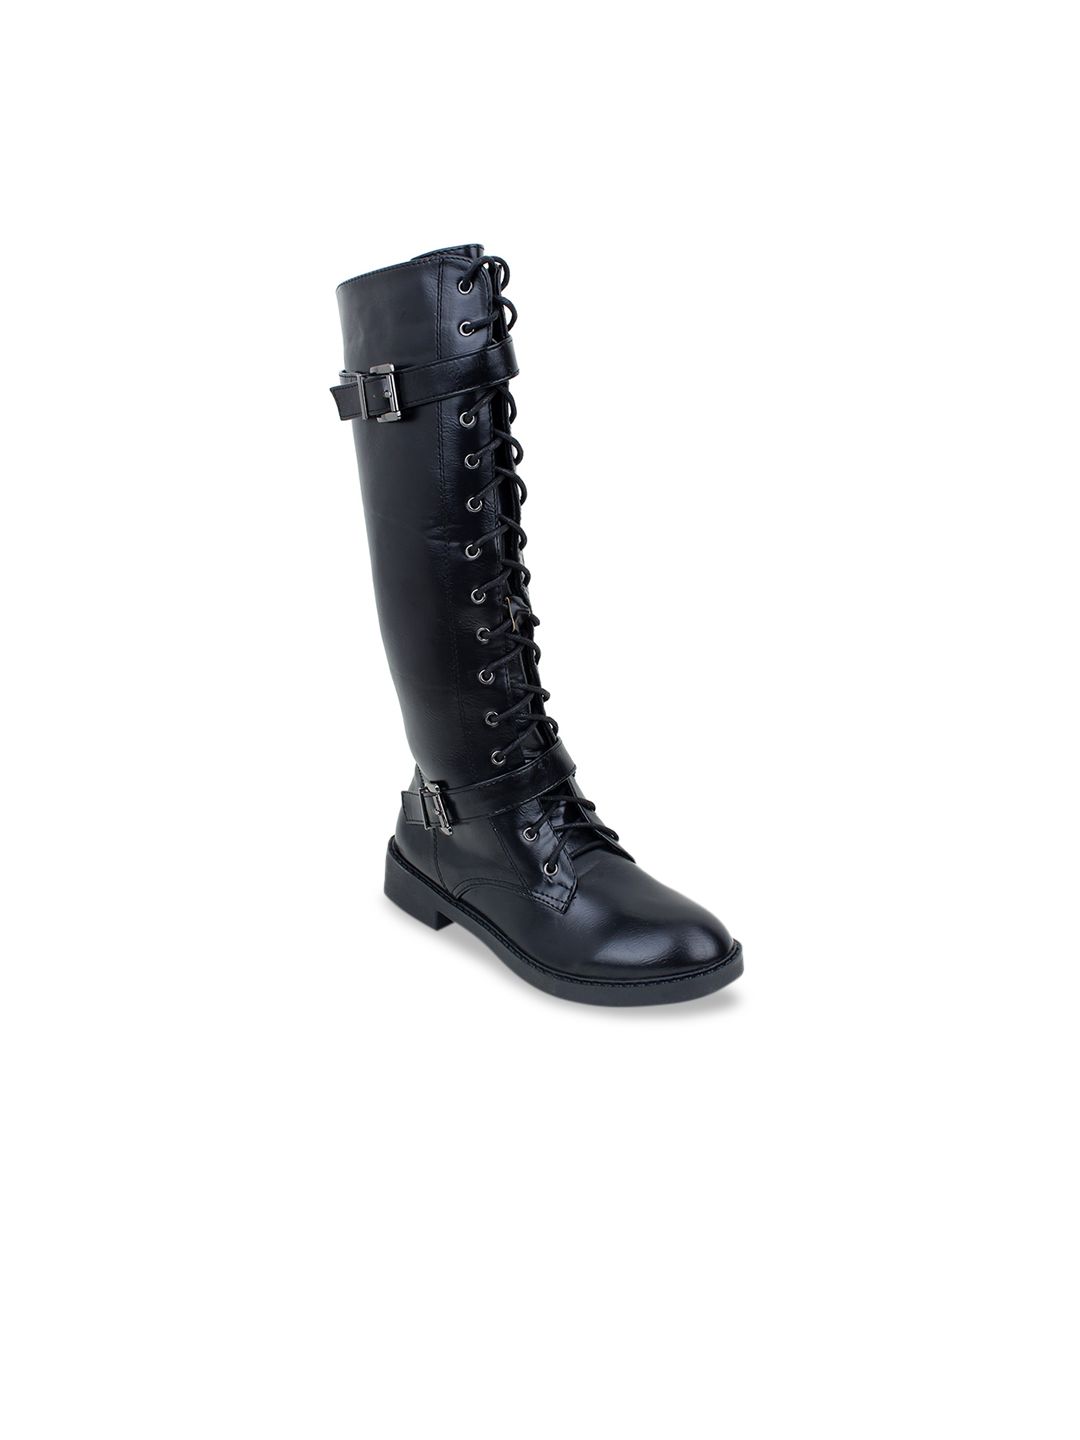 MSC Women Black Woven Design Heeled Boots Price in India